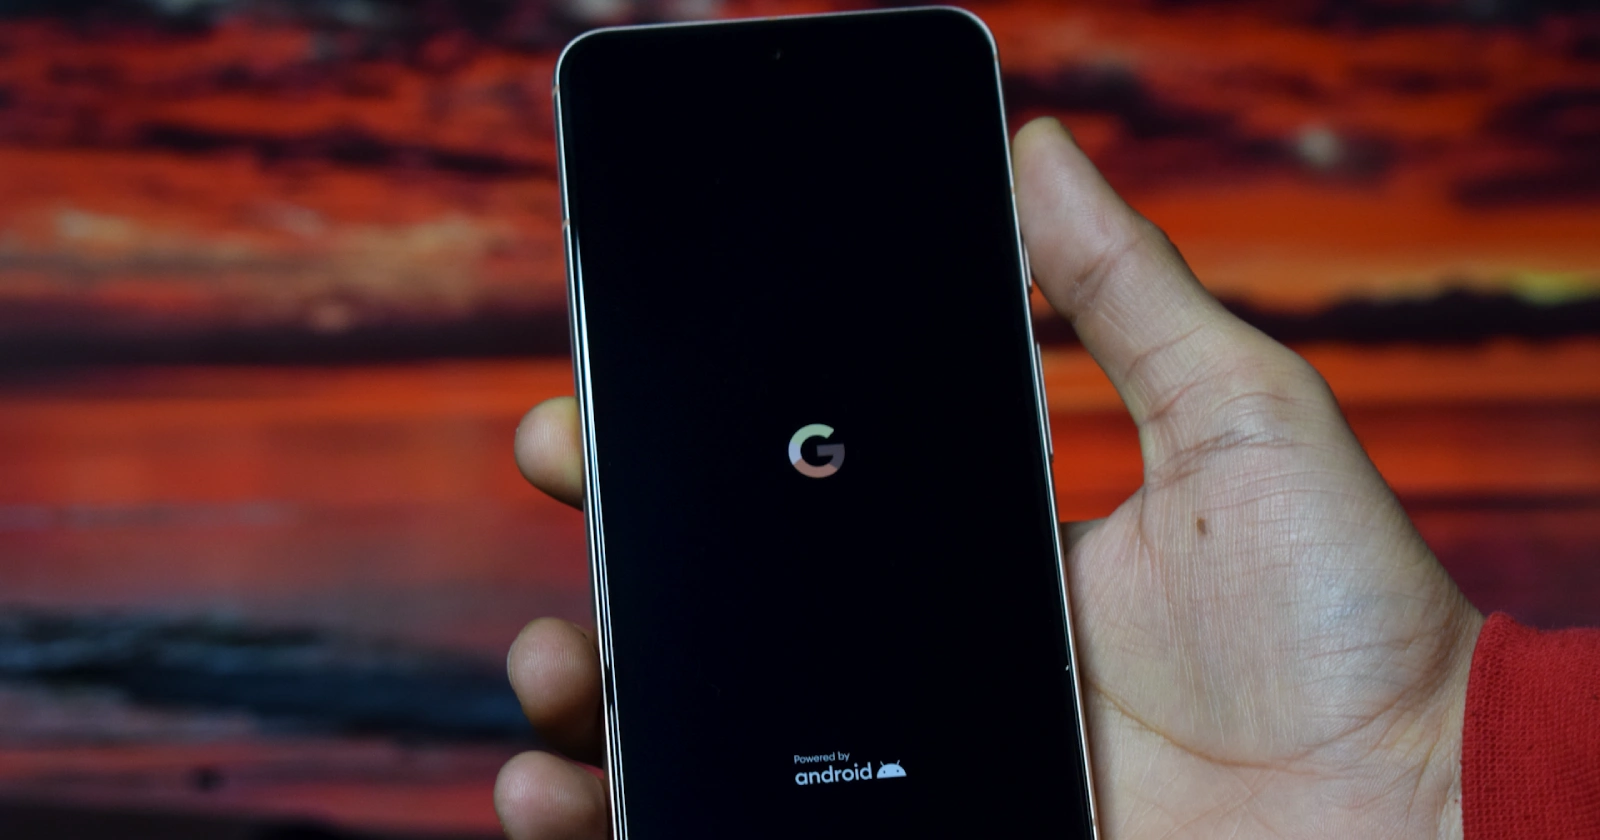 Google to introduce 'Adaptive Thermal' feature for Pixel phones to suggest ways to prevent overheating